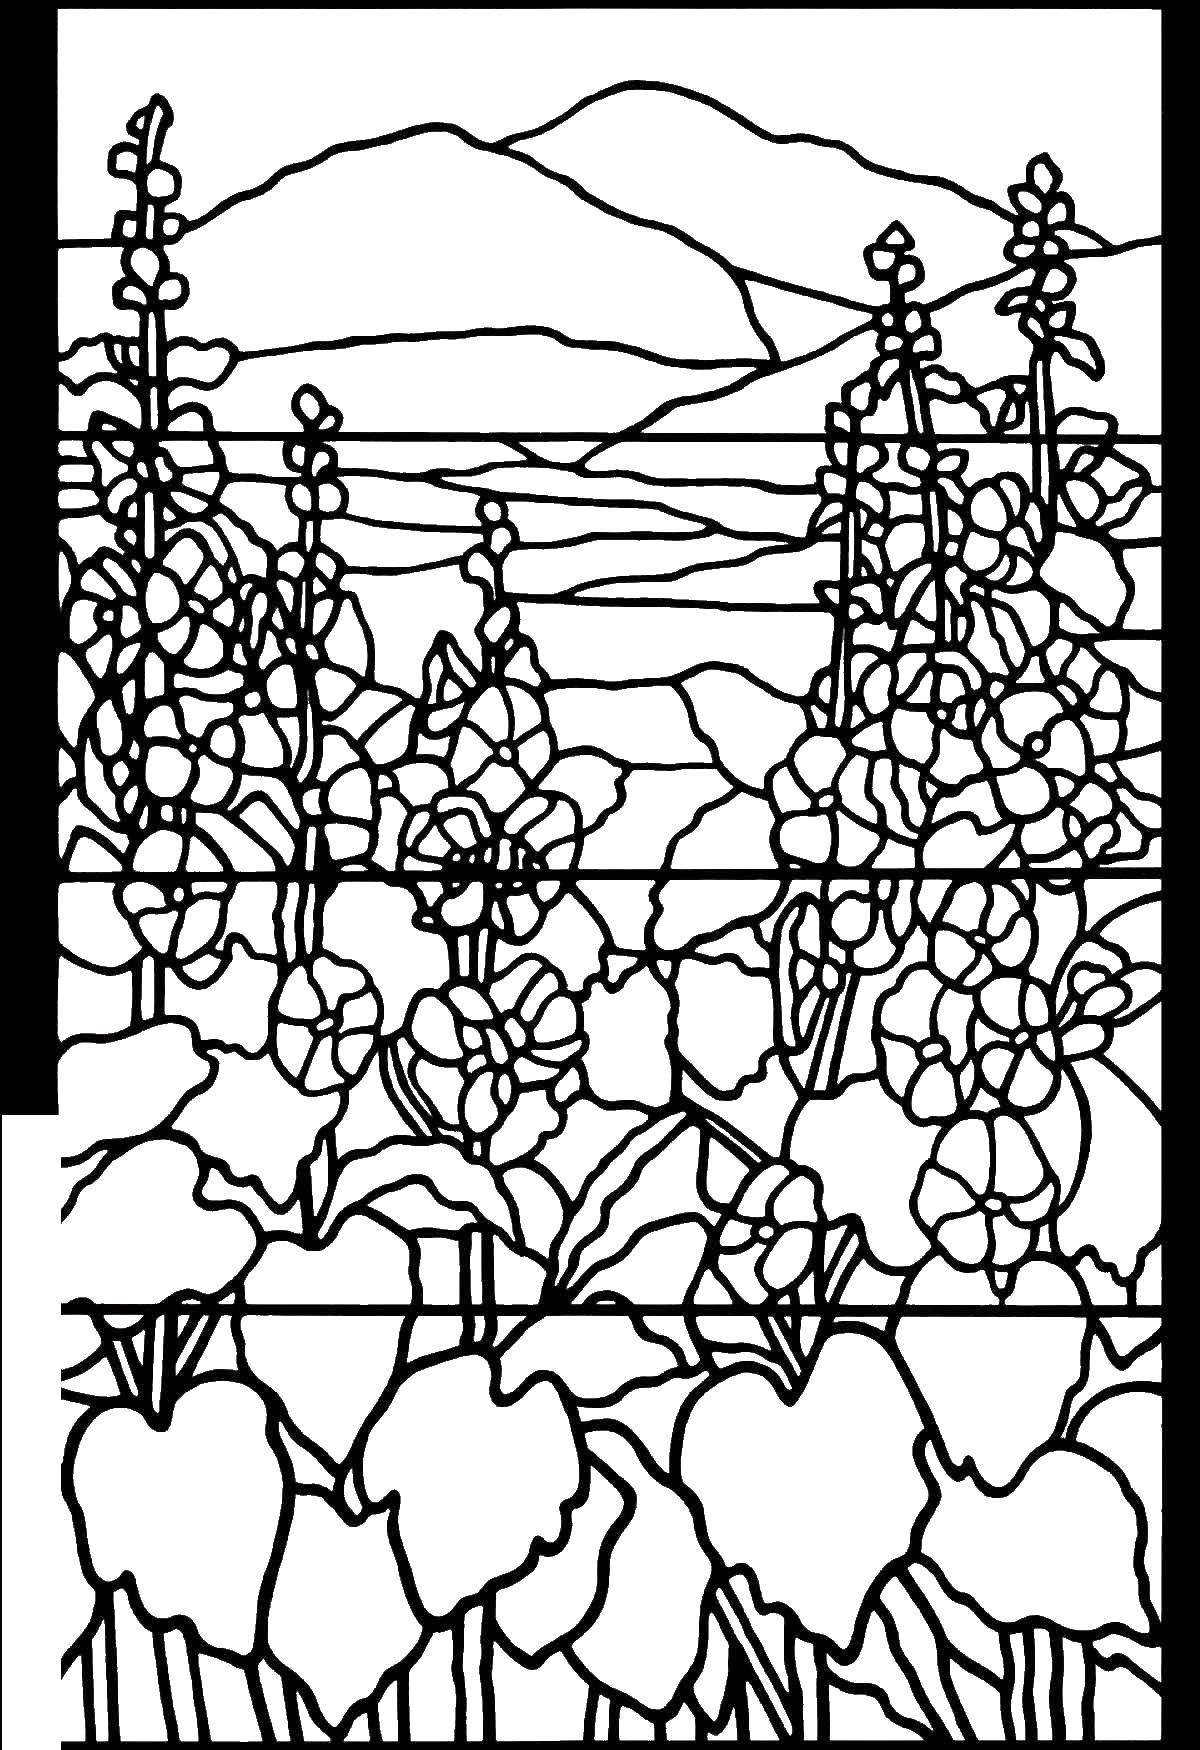 Coloring Flowers. Category stained glass. Tags:  stained glass, wood, flowers.